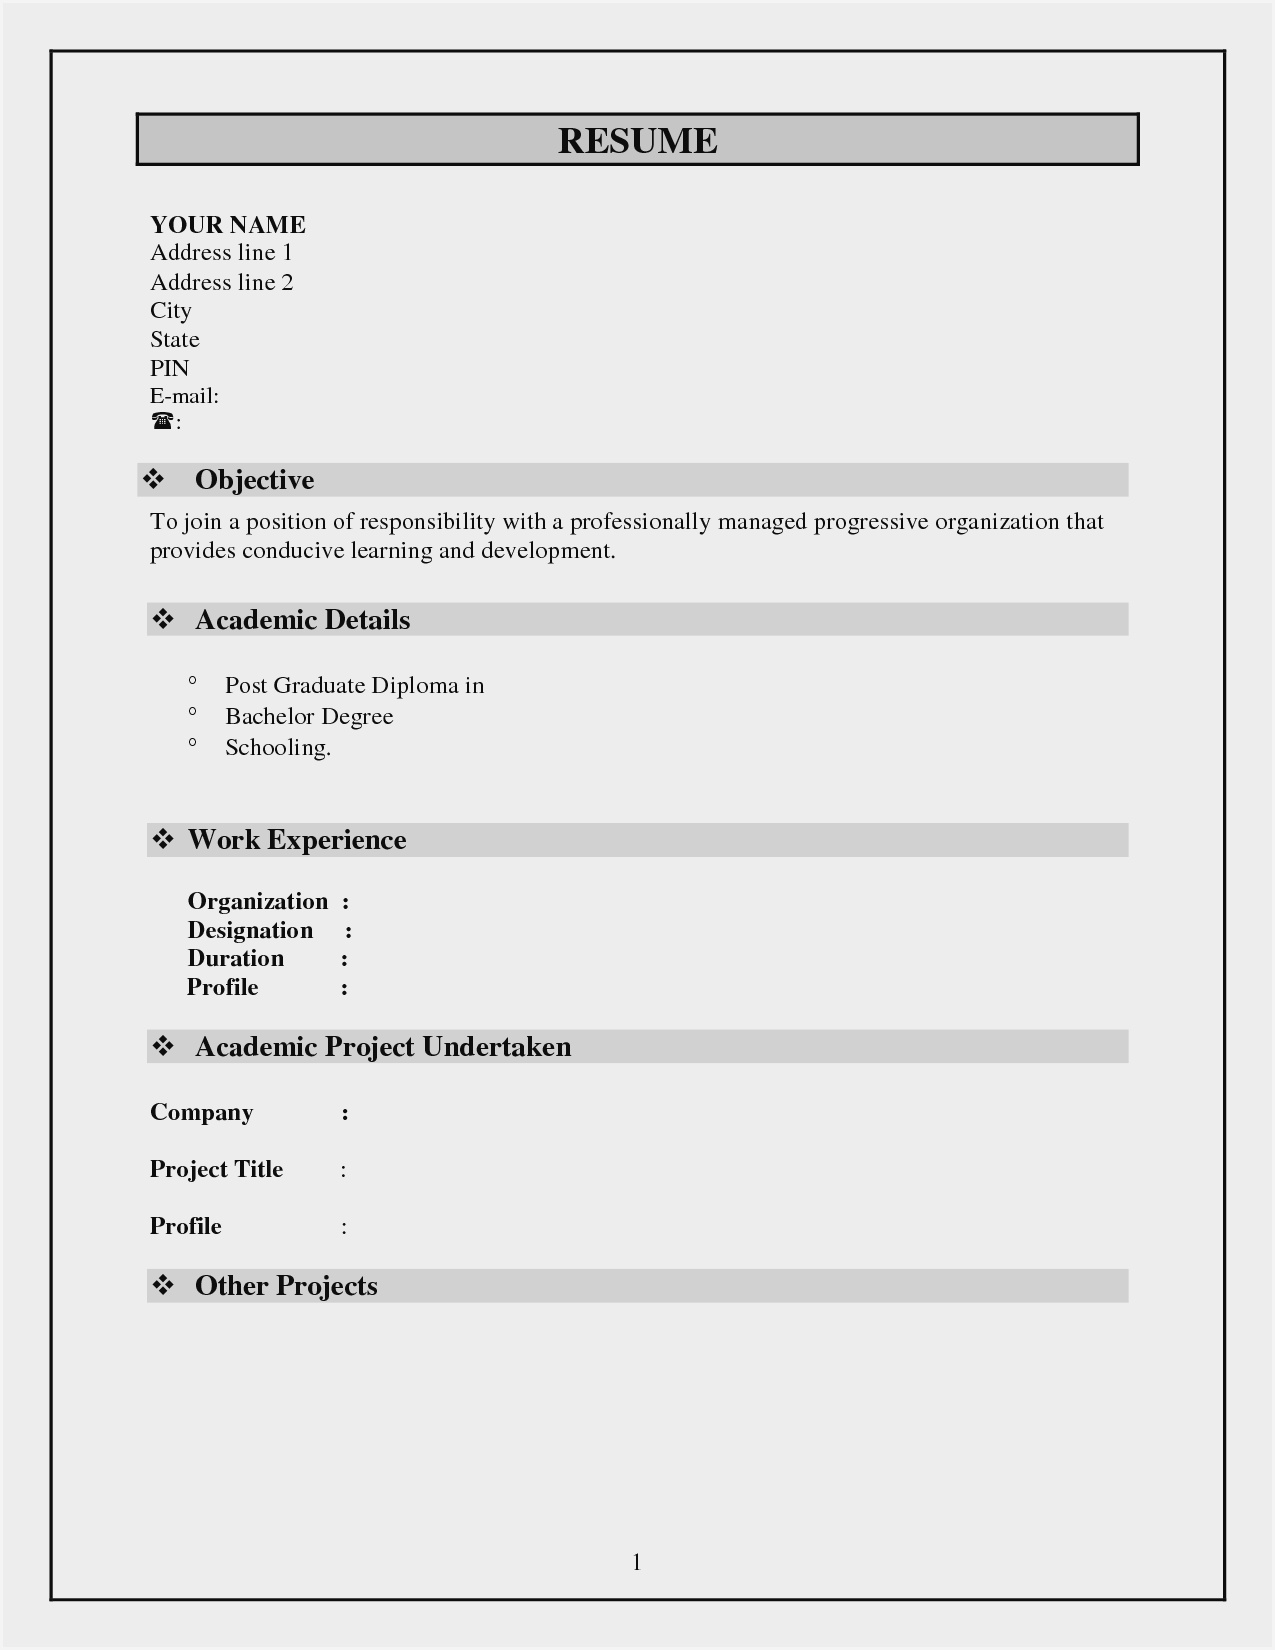 Blank Resume Format Pdf Free Download - Resume : Resume With Regard To Free Blank Resume Templates For Microsoft Word